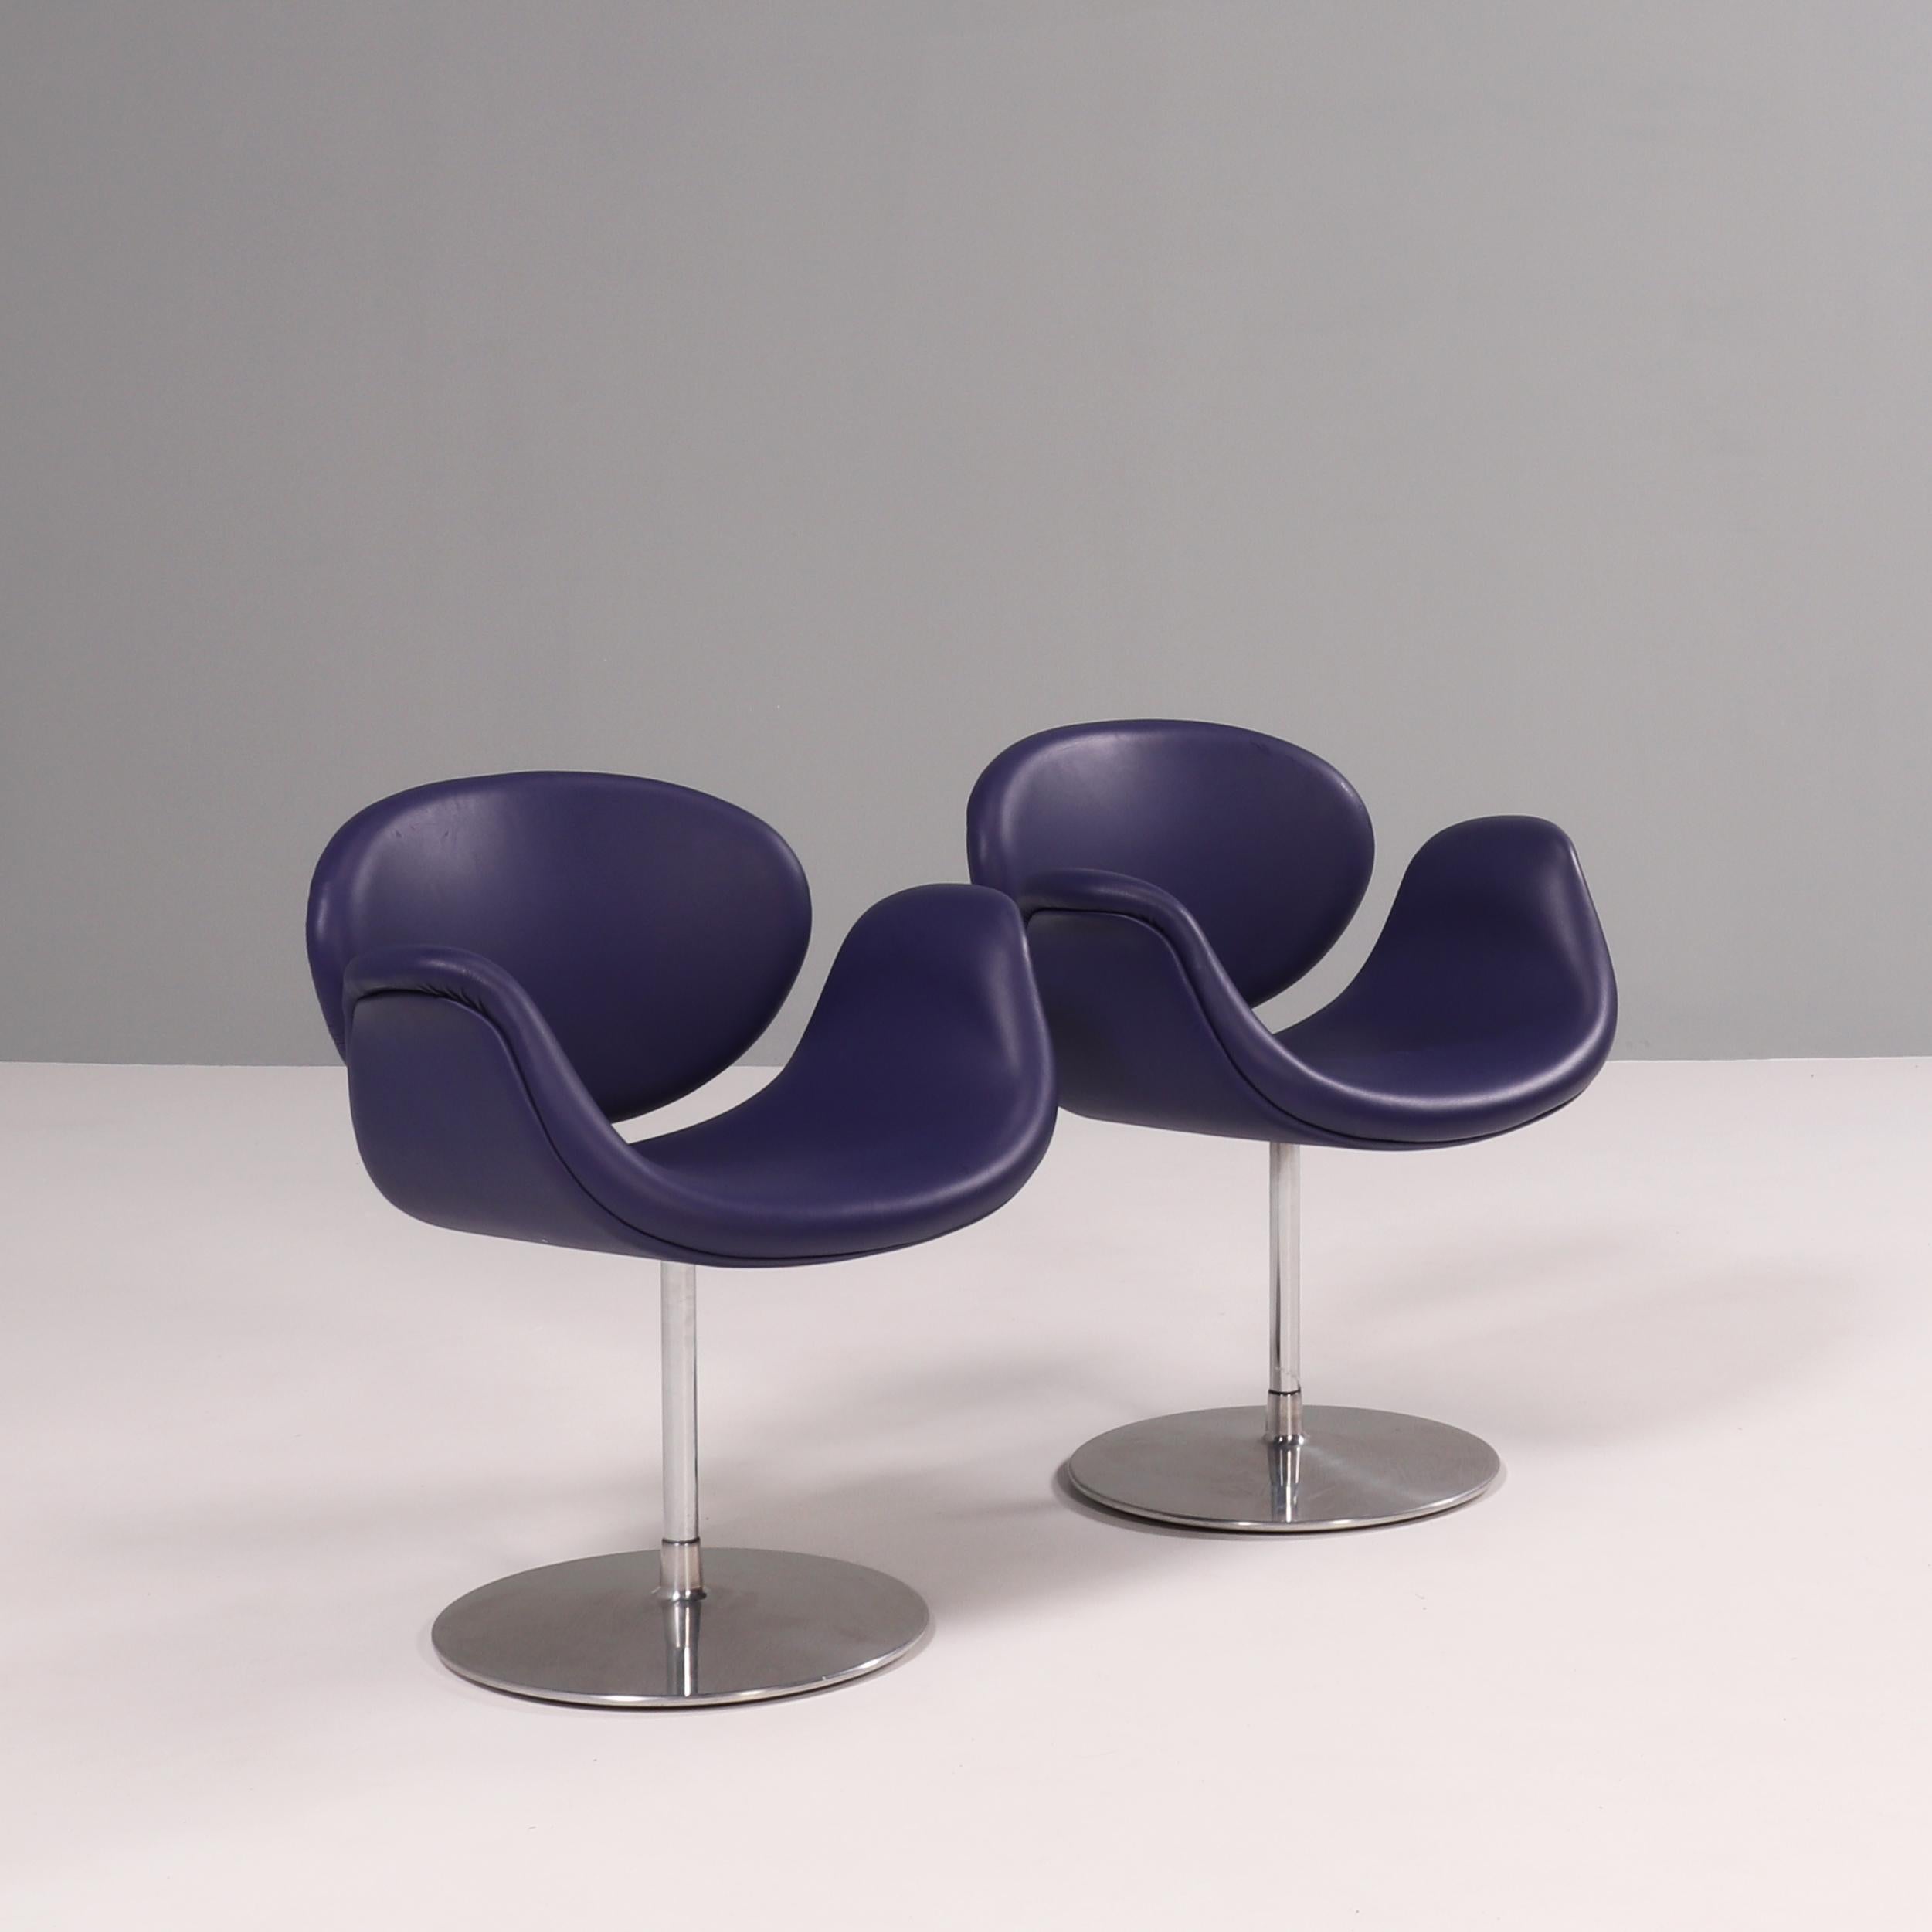 Originally designed by Pierre Paulin in 1965, the Little Tulip chair is a design icon.

Inspired by the flower, the chairs have a Tulip-esque silhouette with a petal shaped seat which curves to create armrests.

Upholstered in purple leather,